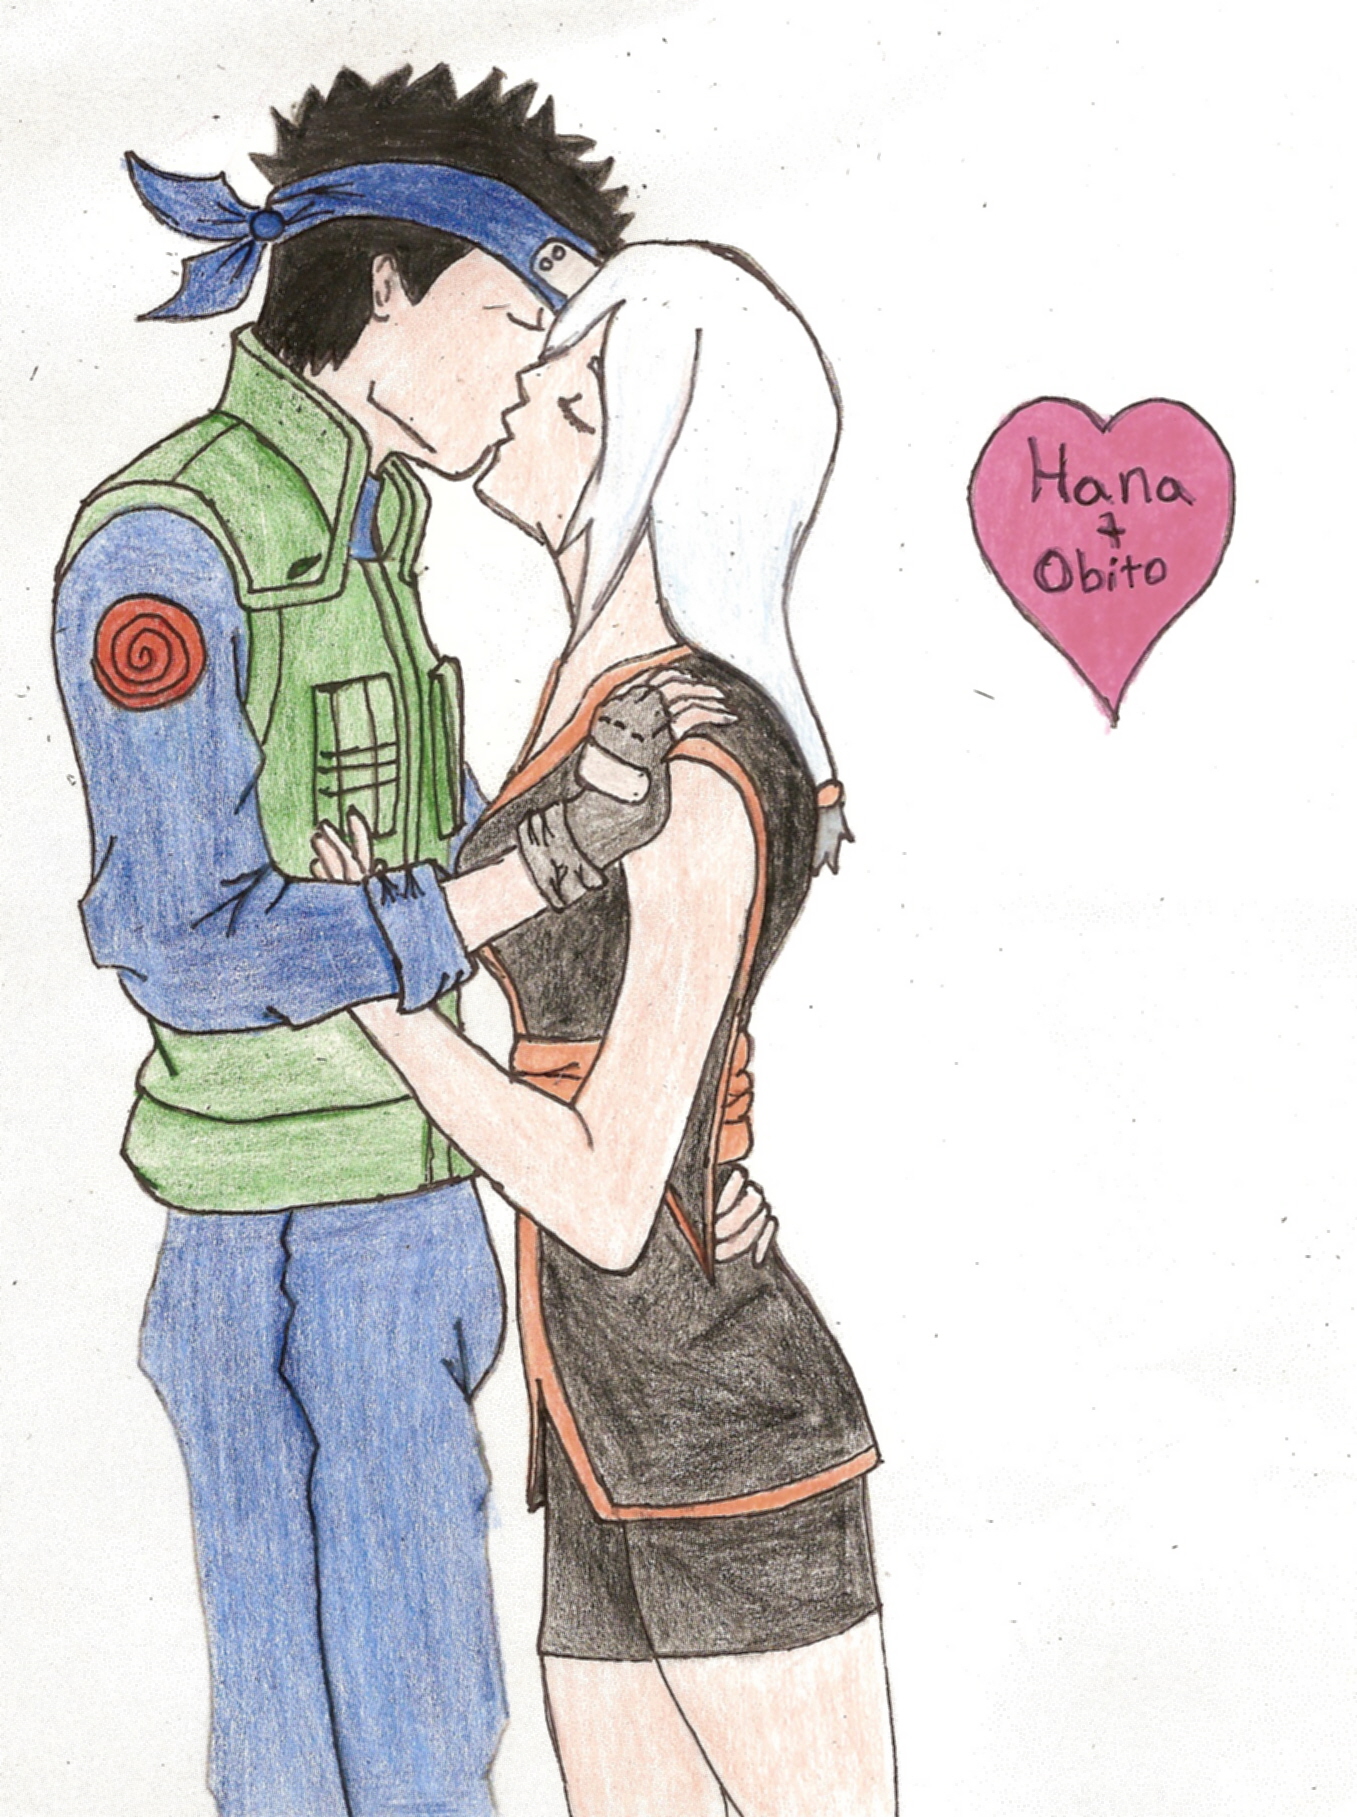 Hana and Obito by KrisChan